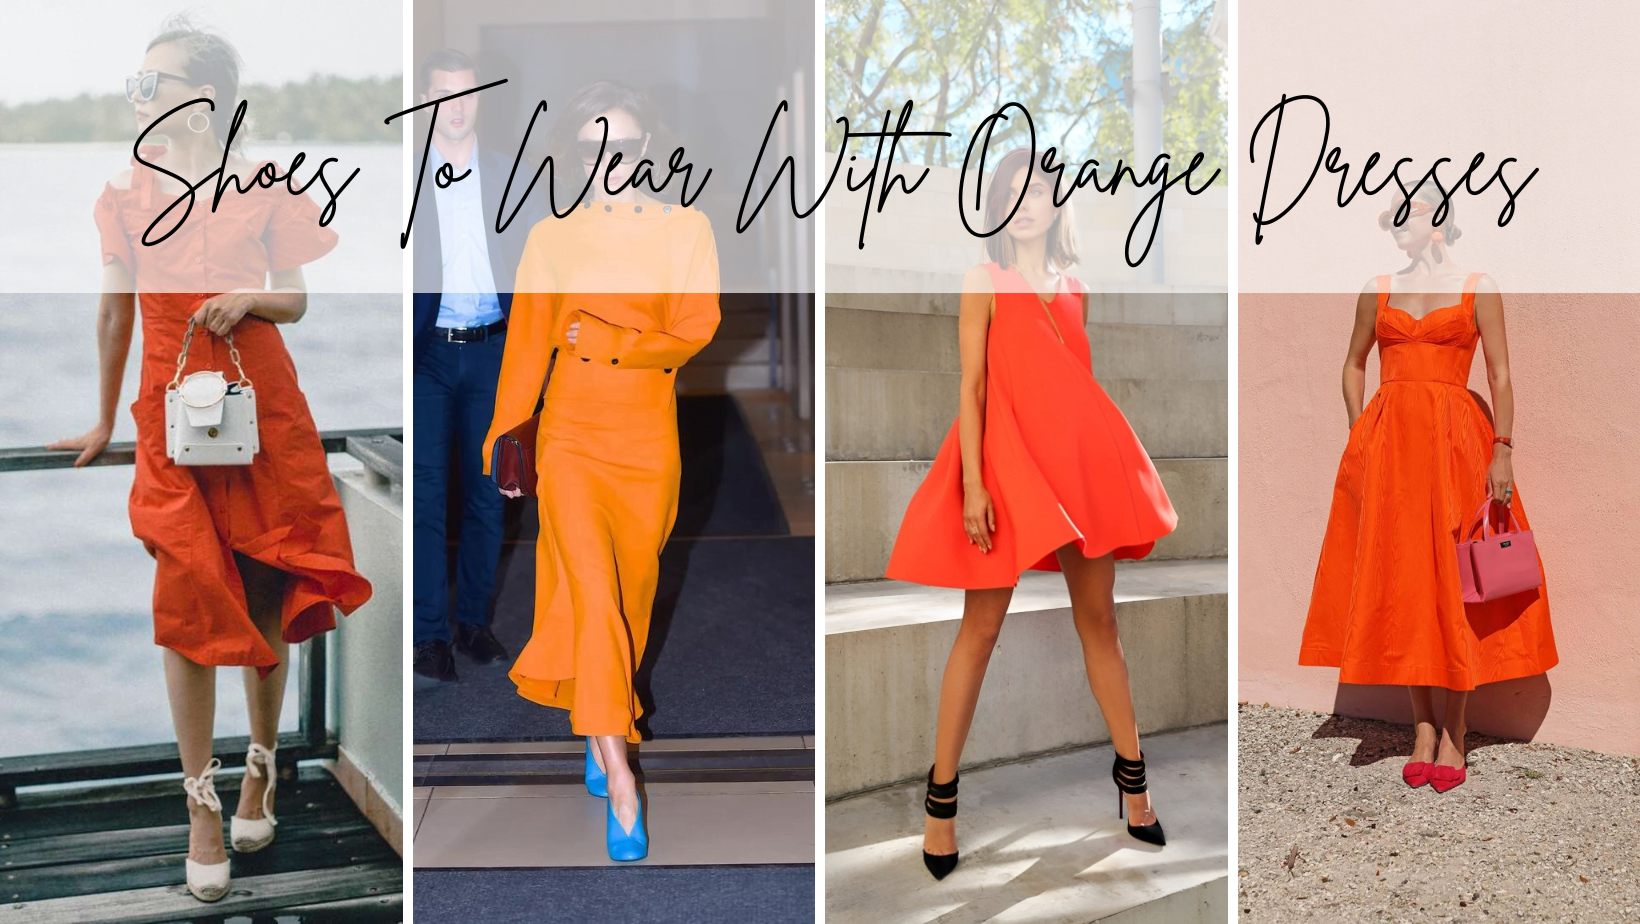 Shoes to wear with orange dresses